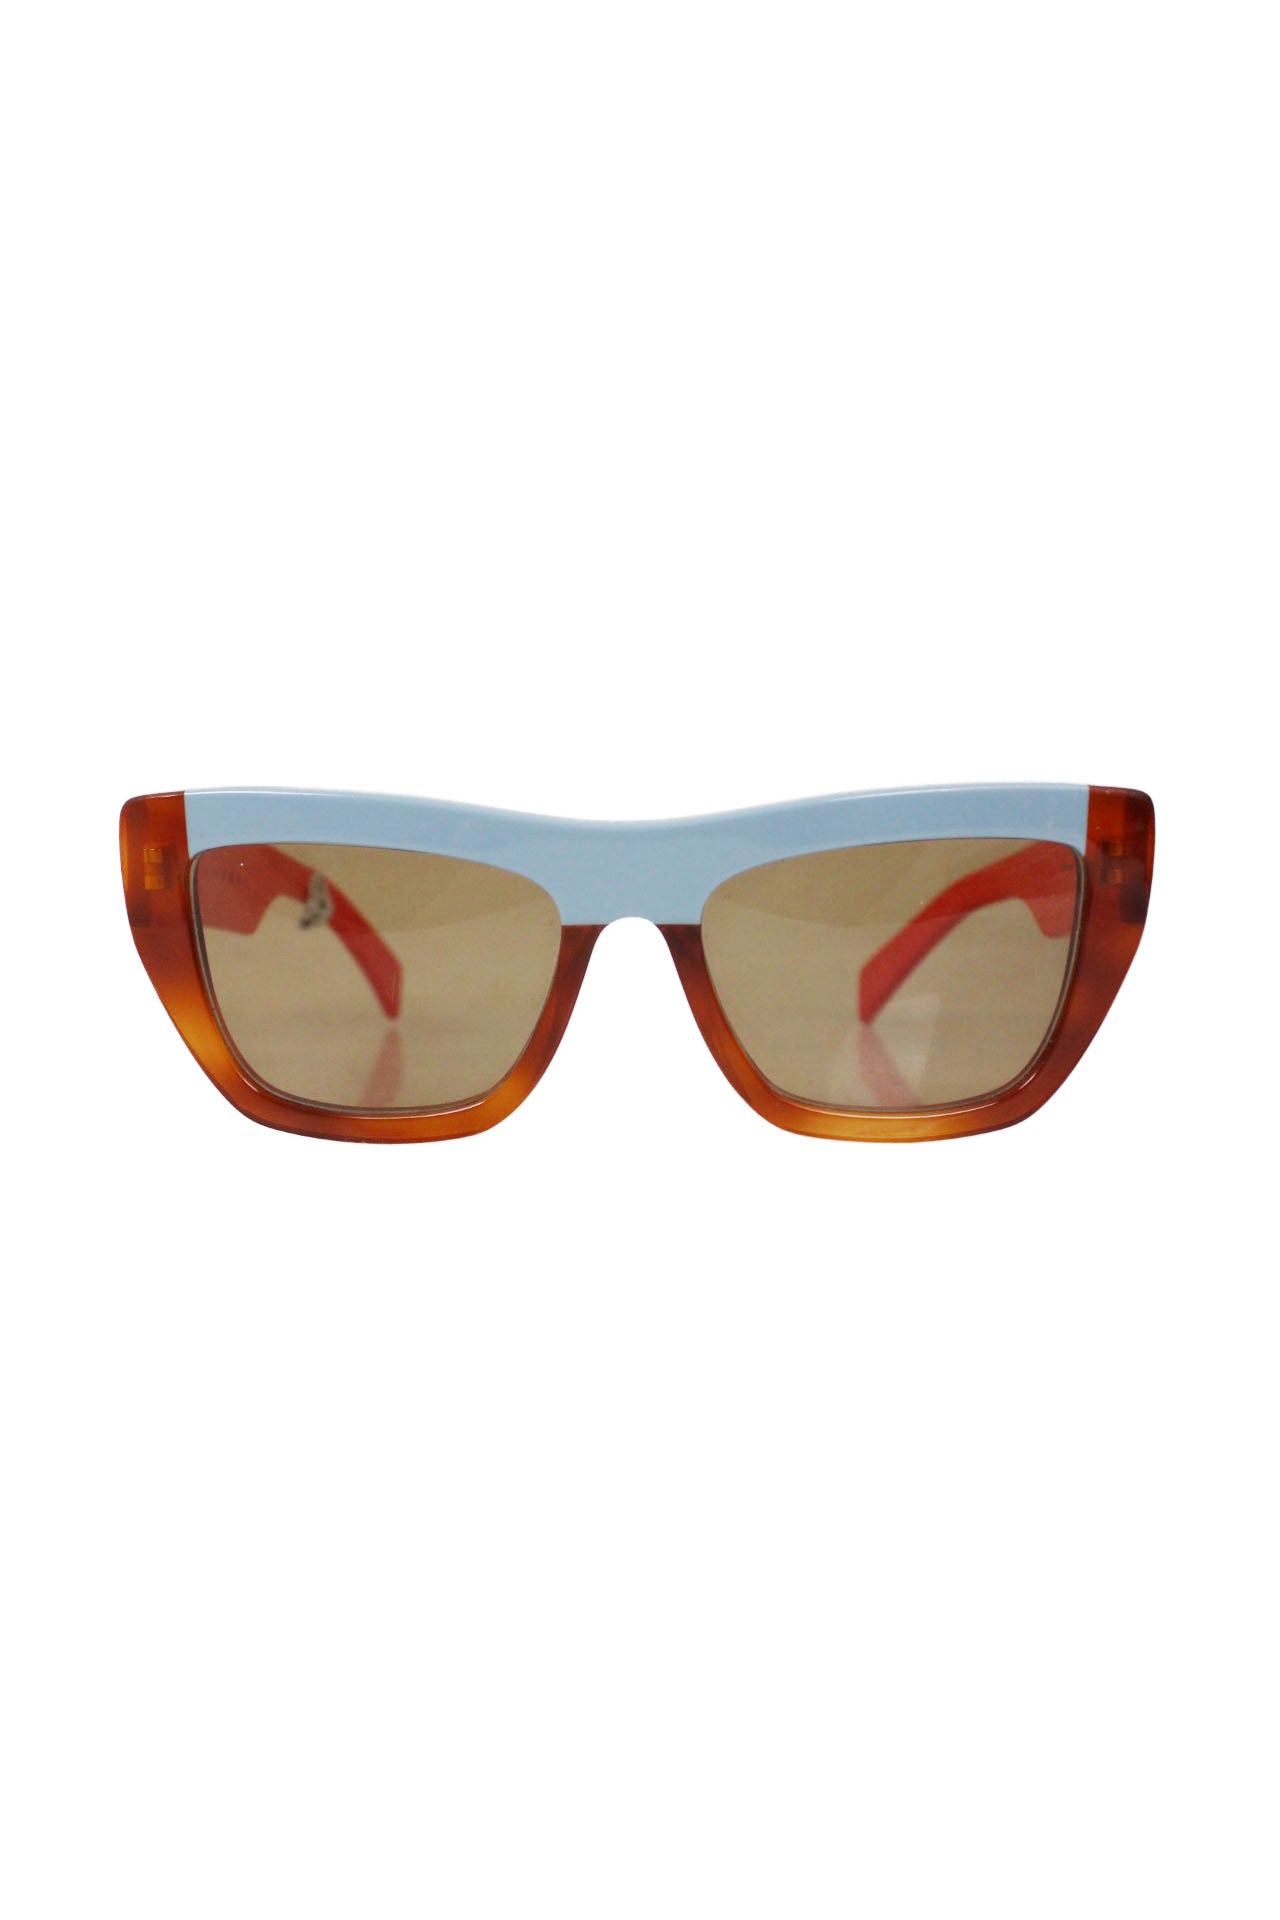  marni multi-color sunglasses. features curved rectangular shape, dark yellow tinted lens, bright red temples, duo color rim with dusty blue and translucent orange